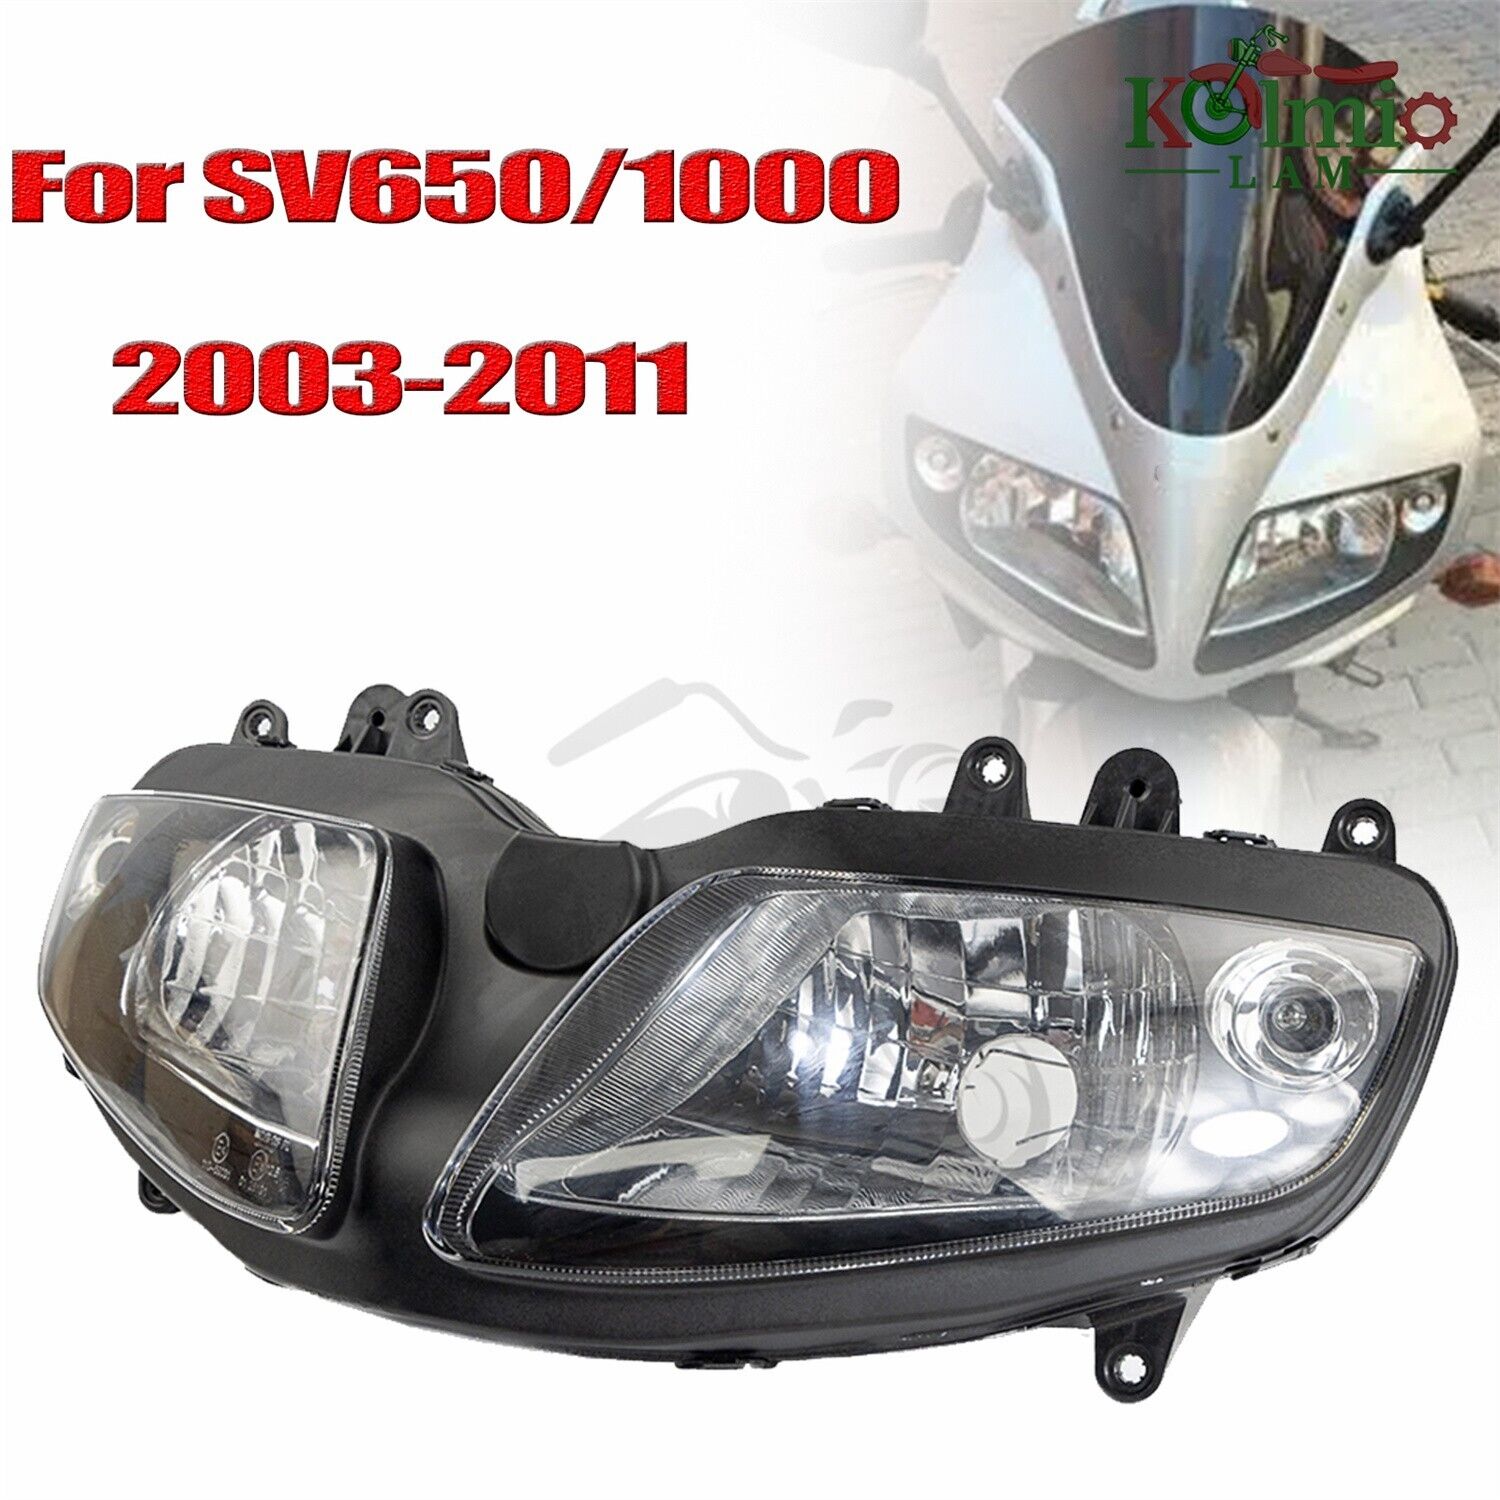 Fit for SUZUKI SV650 SV1000S 2003-2011 Motorcycle Headlight Assembly Headlamp 07